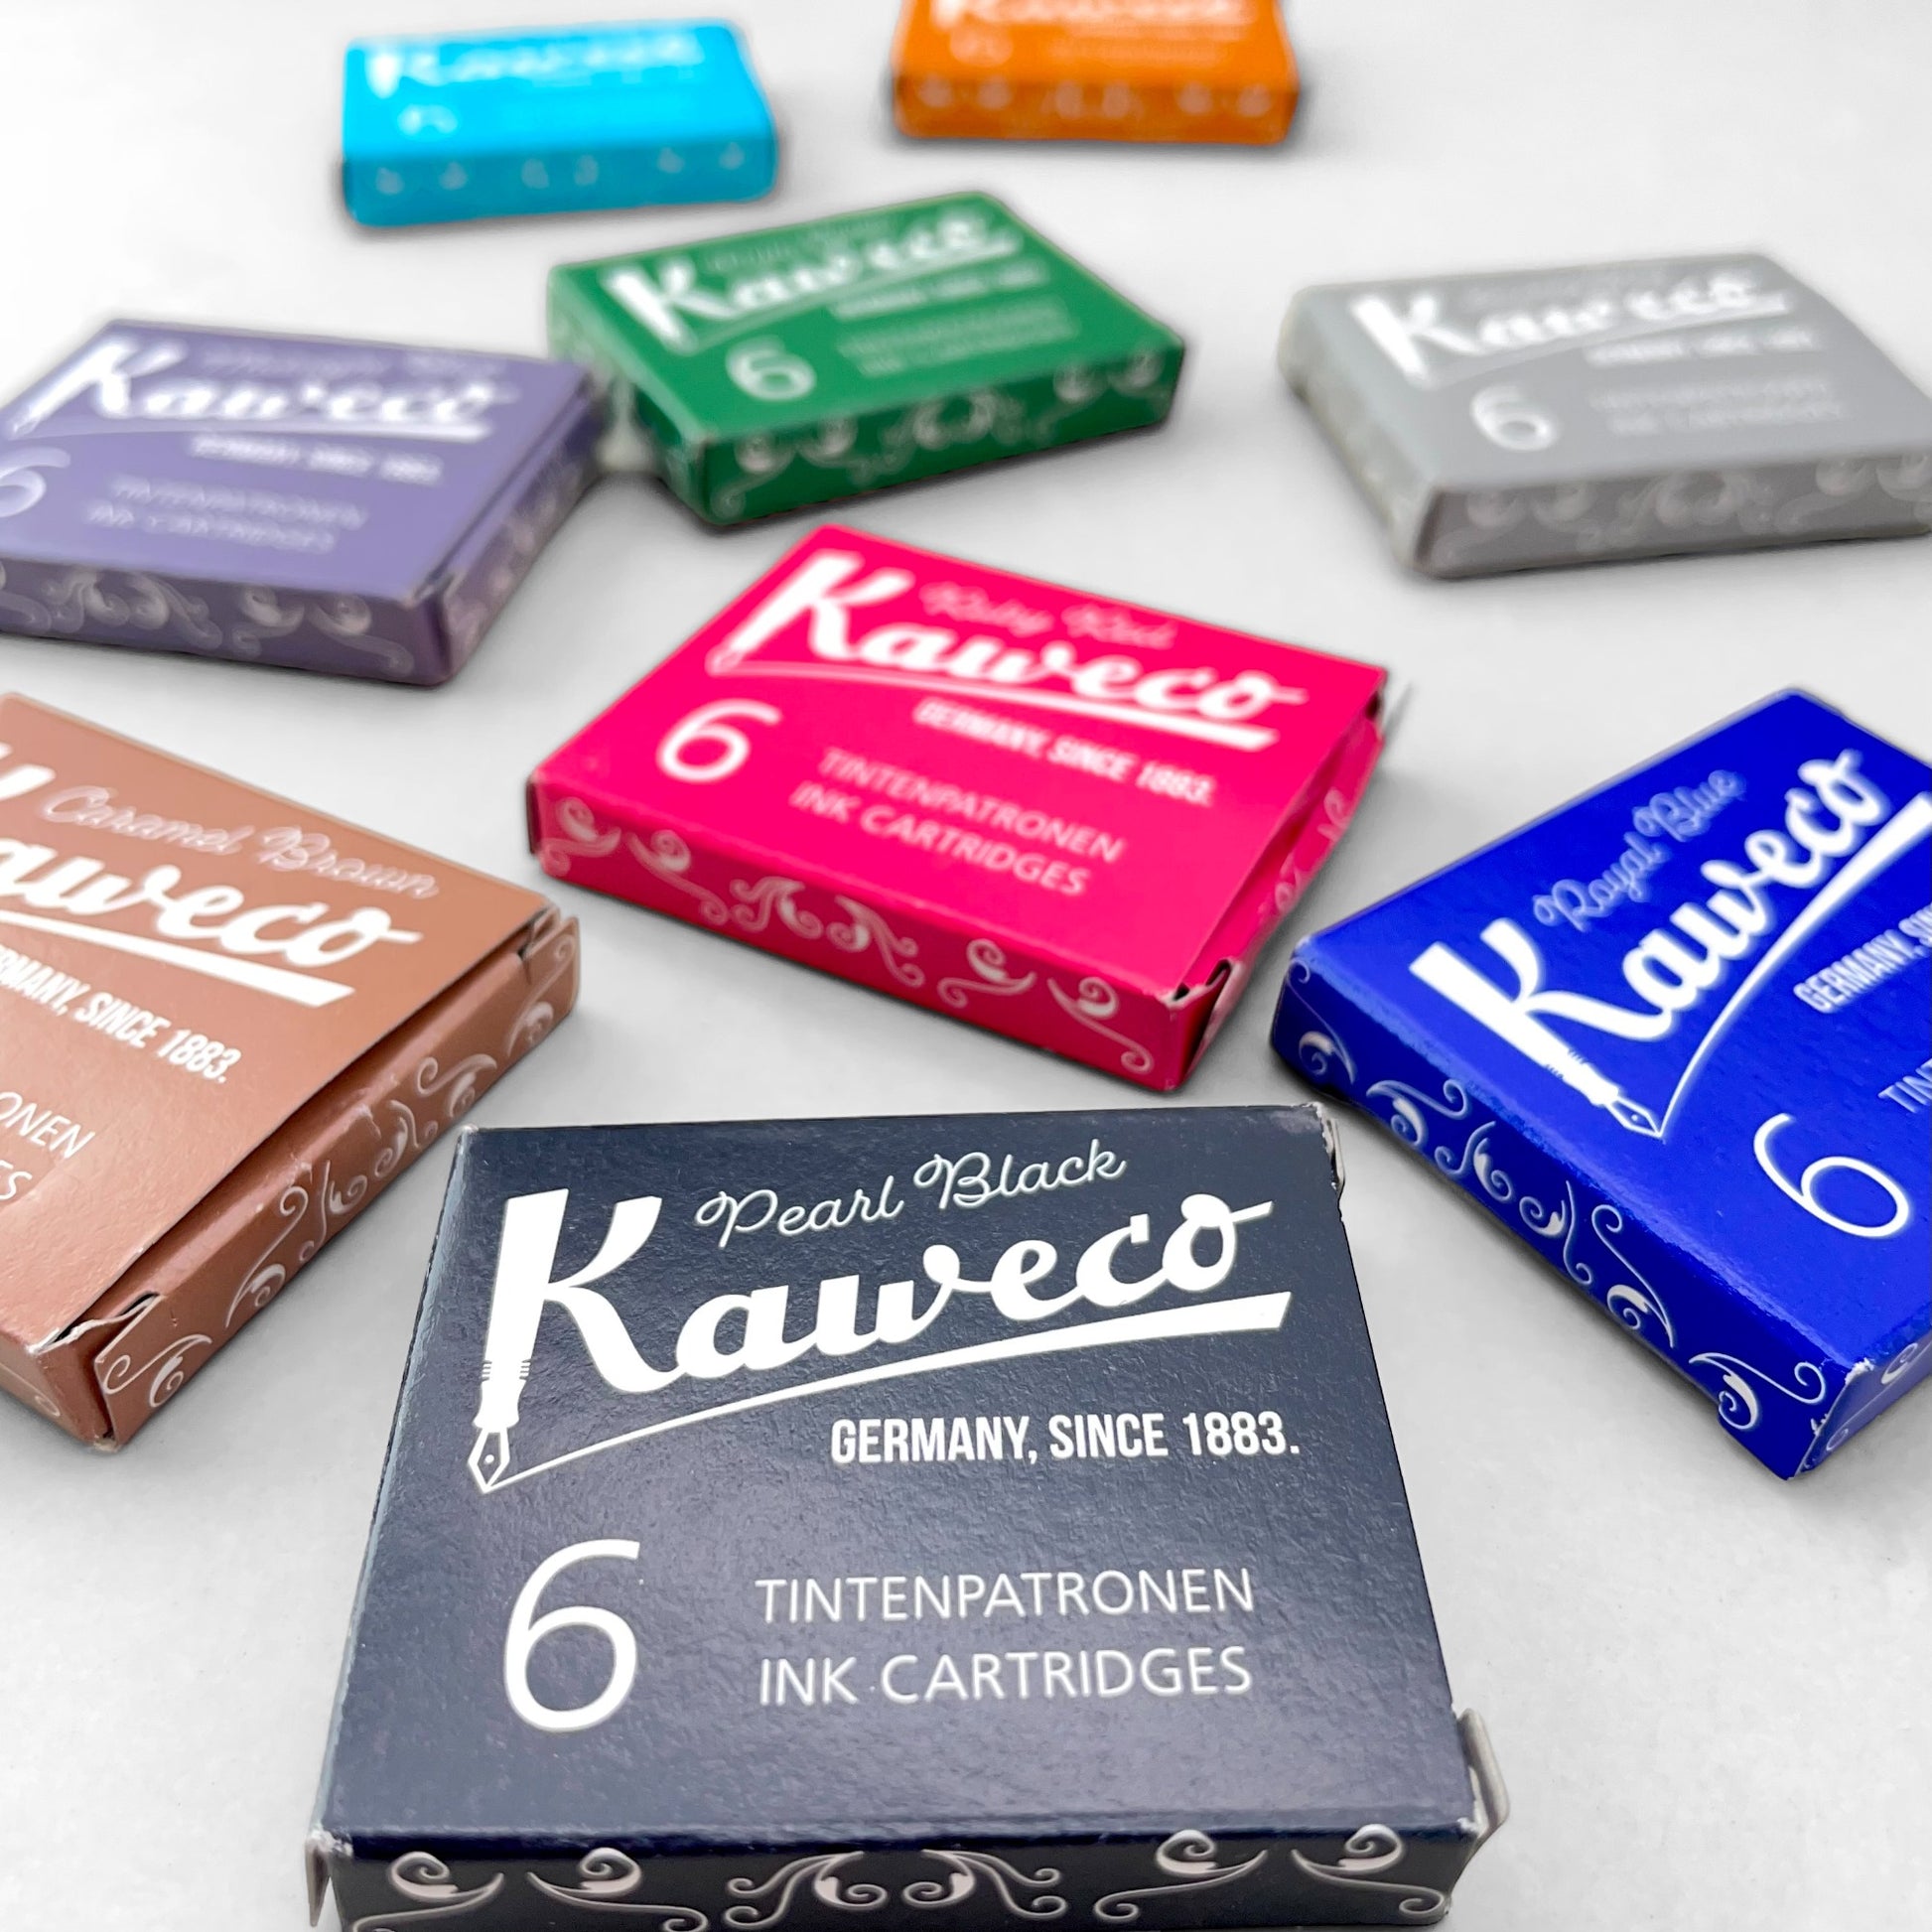 Box of 6 ink cartridges by Kaweco in ruby red colour